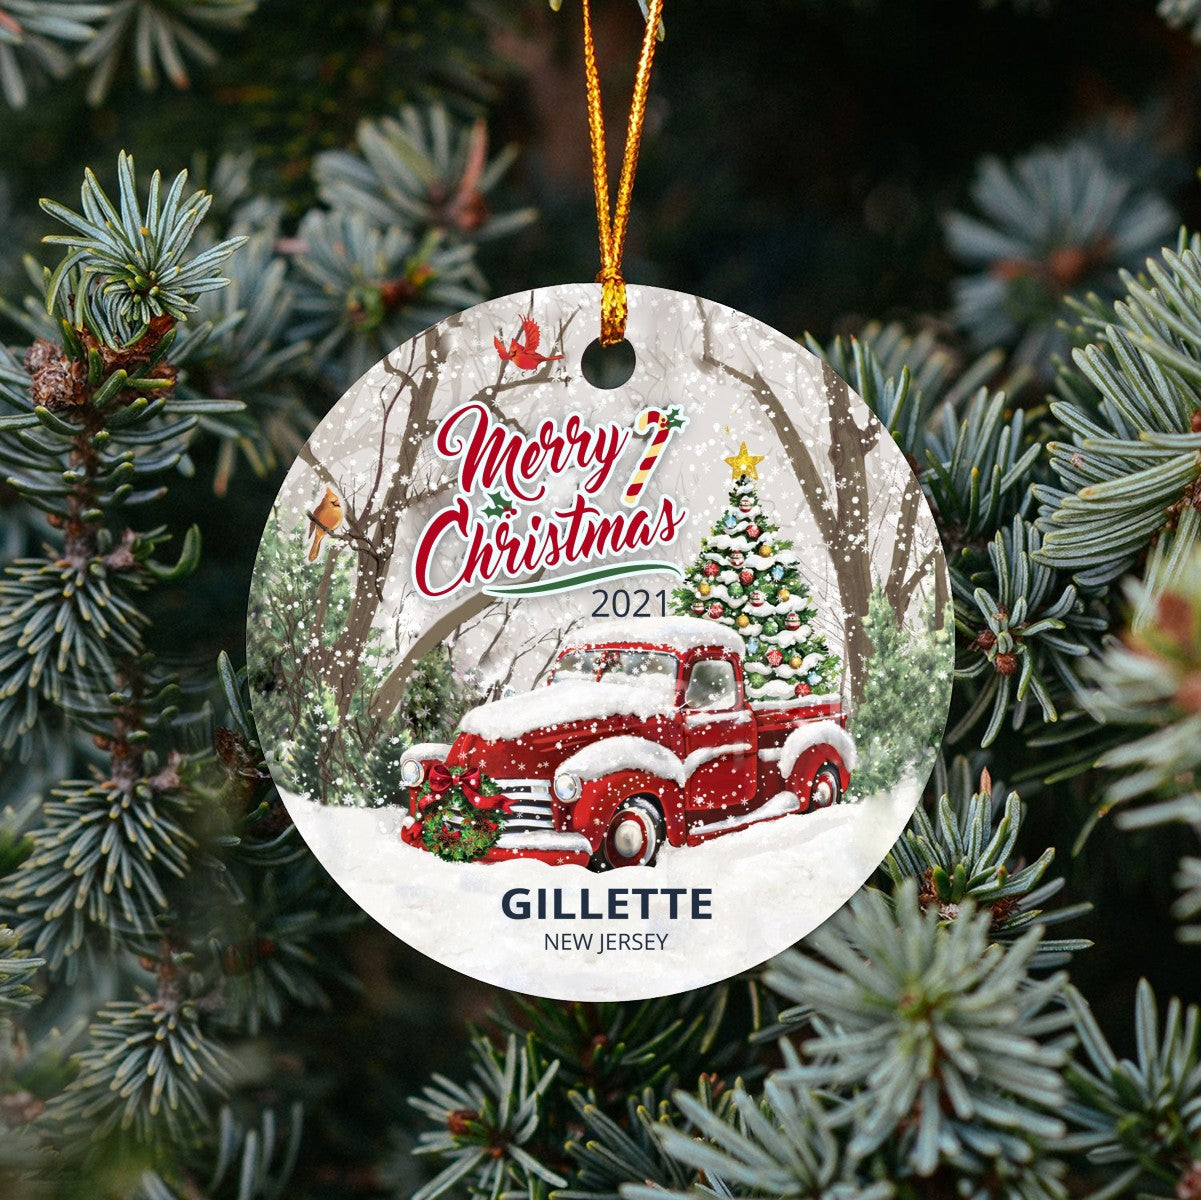 Christmas Tree Ornaments Gillette - Ornament With Name City, State Gillette New Jersey NJ Ornament - Red Truck Xmas Ornaments 3'' Plastic Gift For Family, Friend And Housewarming